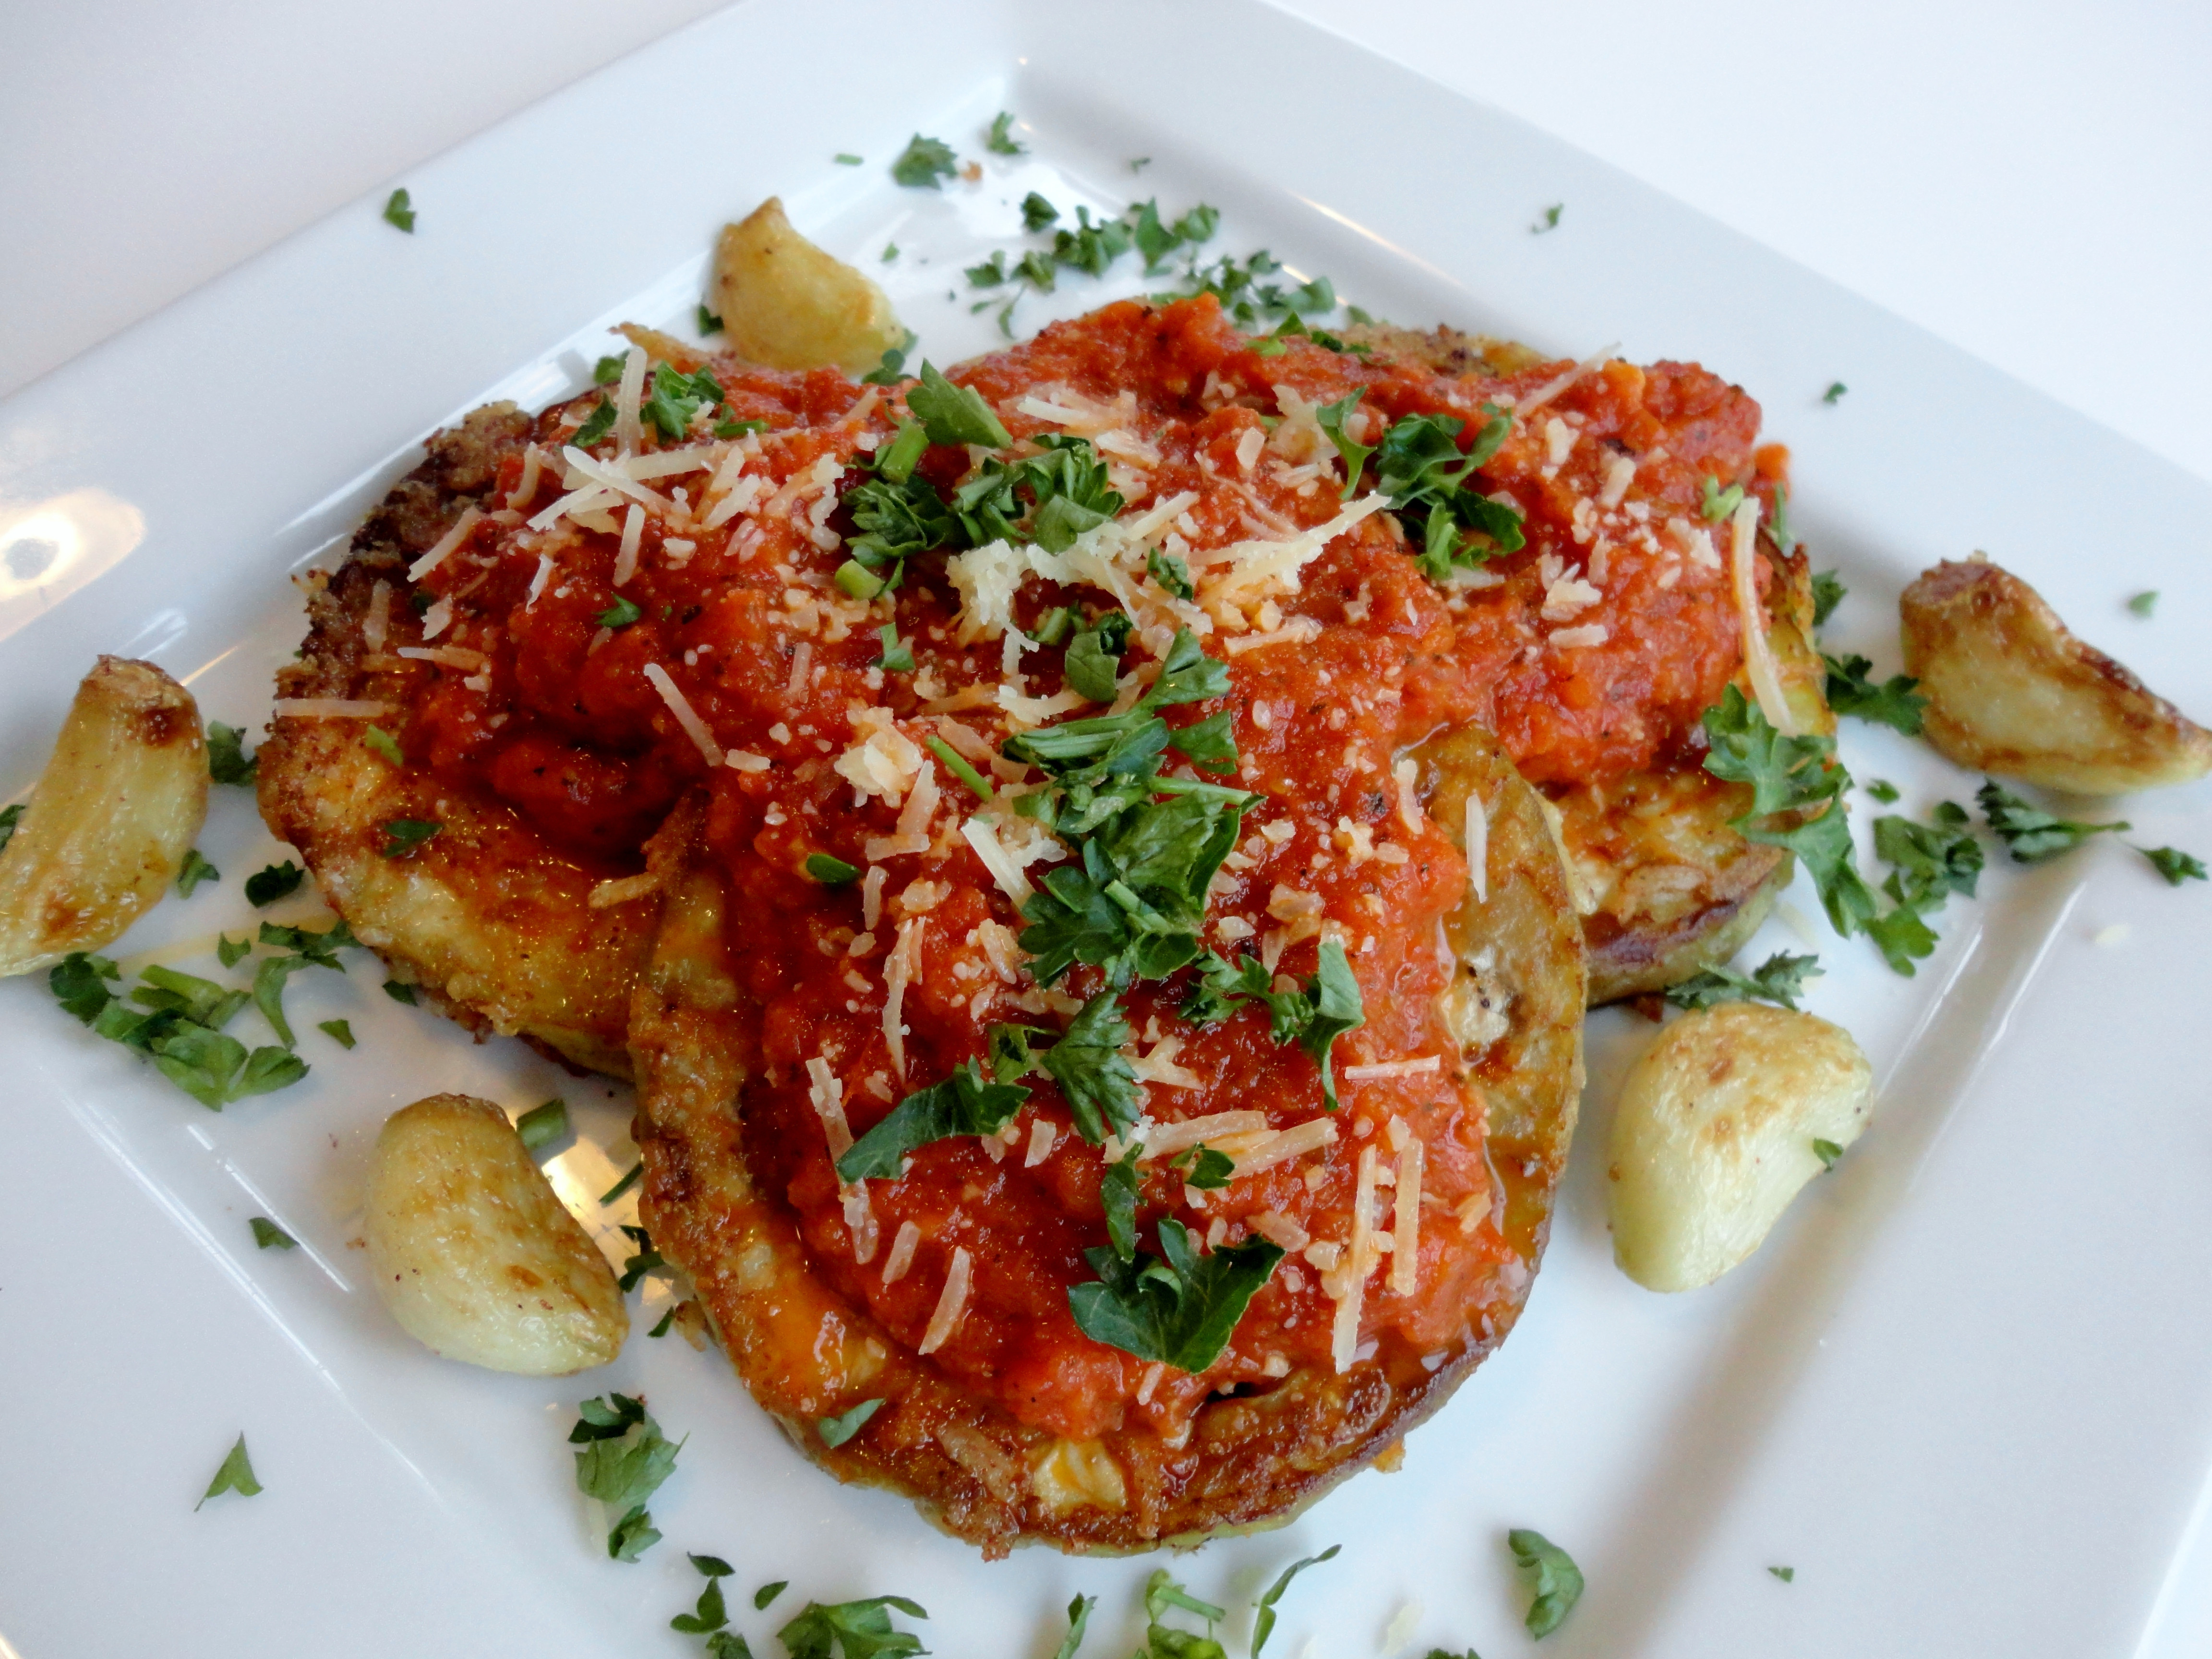 Low Carb Eggplant Parmesan
 Low Carb Eggplant Parmesan with Fire Roasted Tomato Sauce